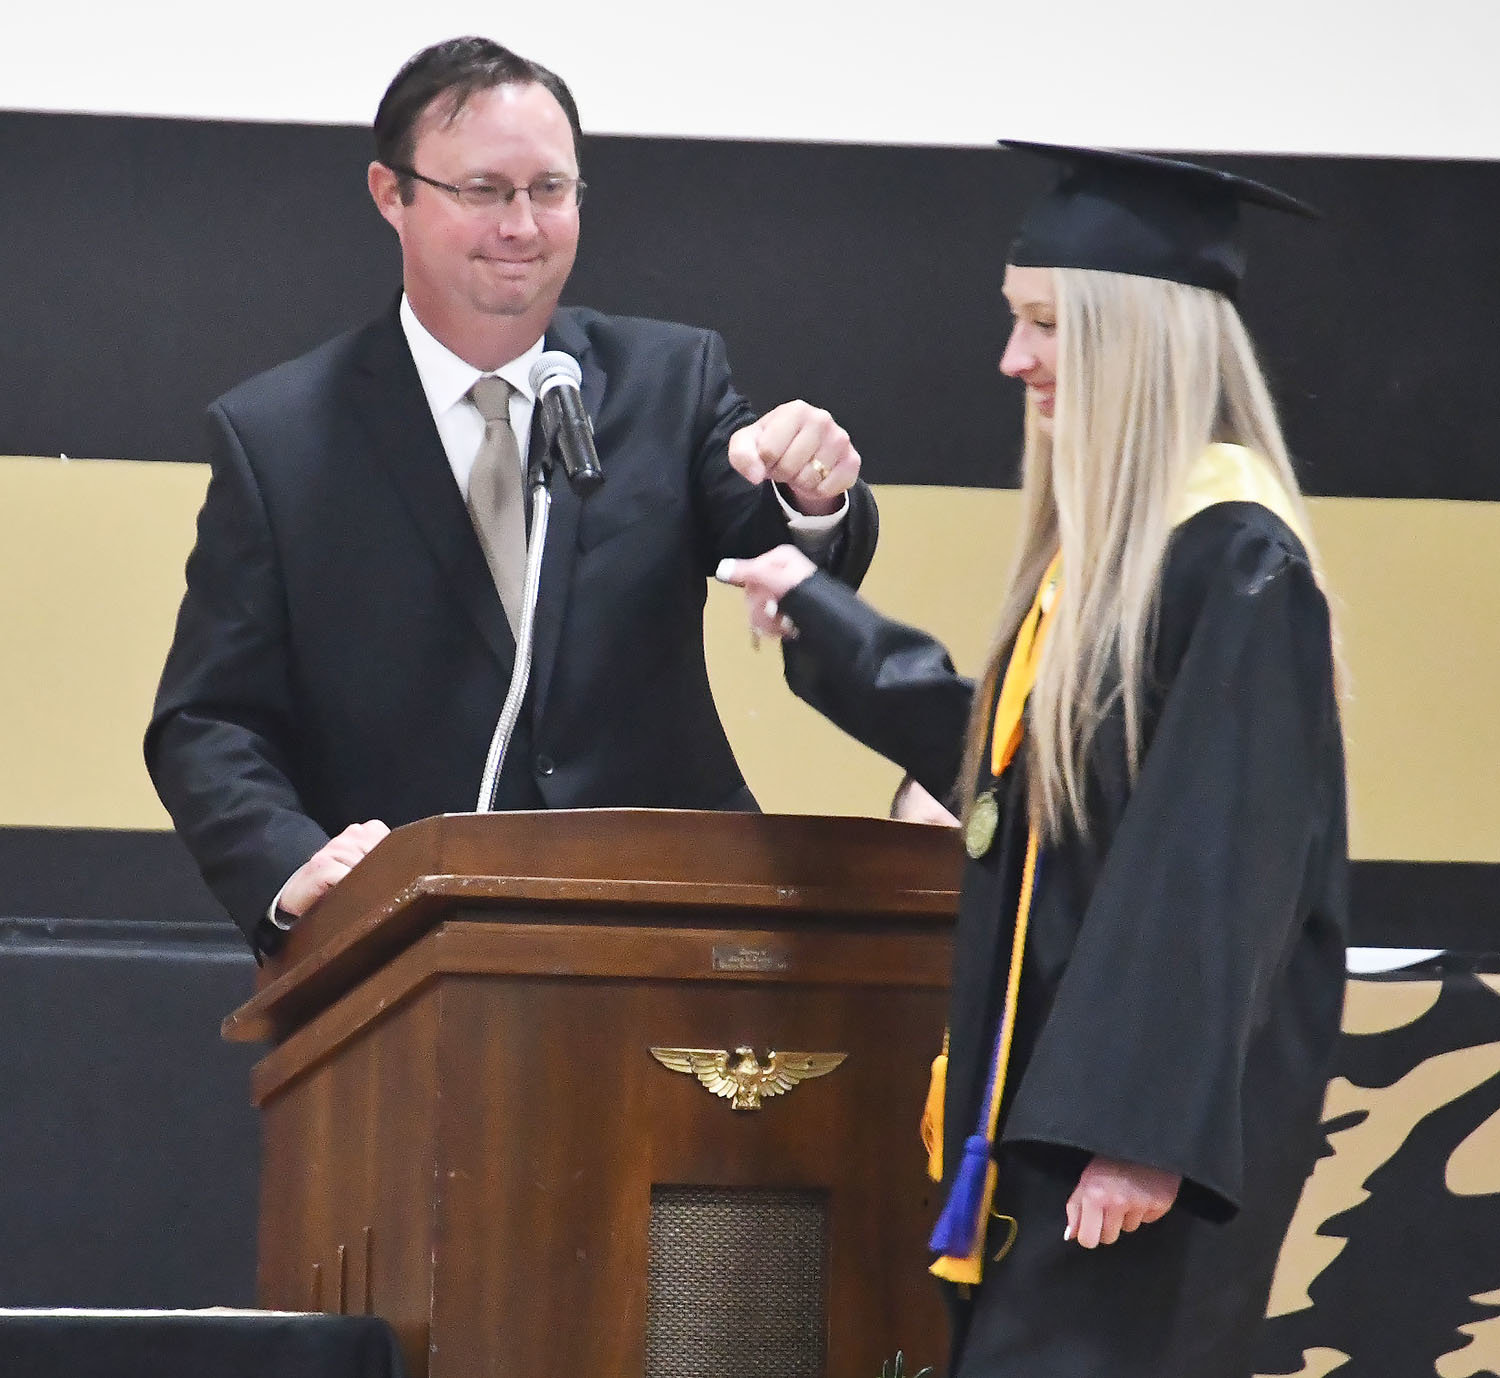 Cairo High School principal Greg Taylor gives a fist bump to his daughter, Morgan, just before Morgan received her diploma on Sunday.